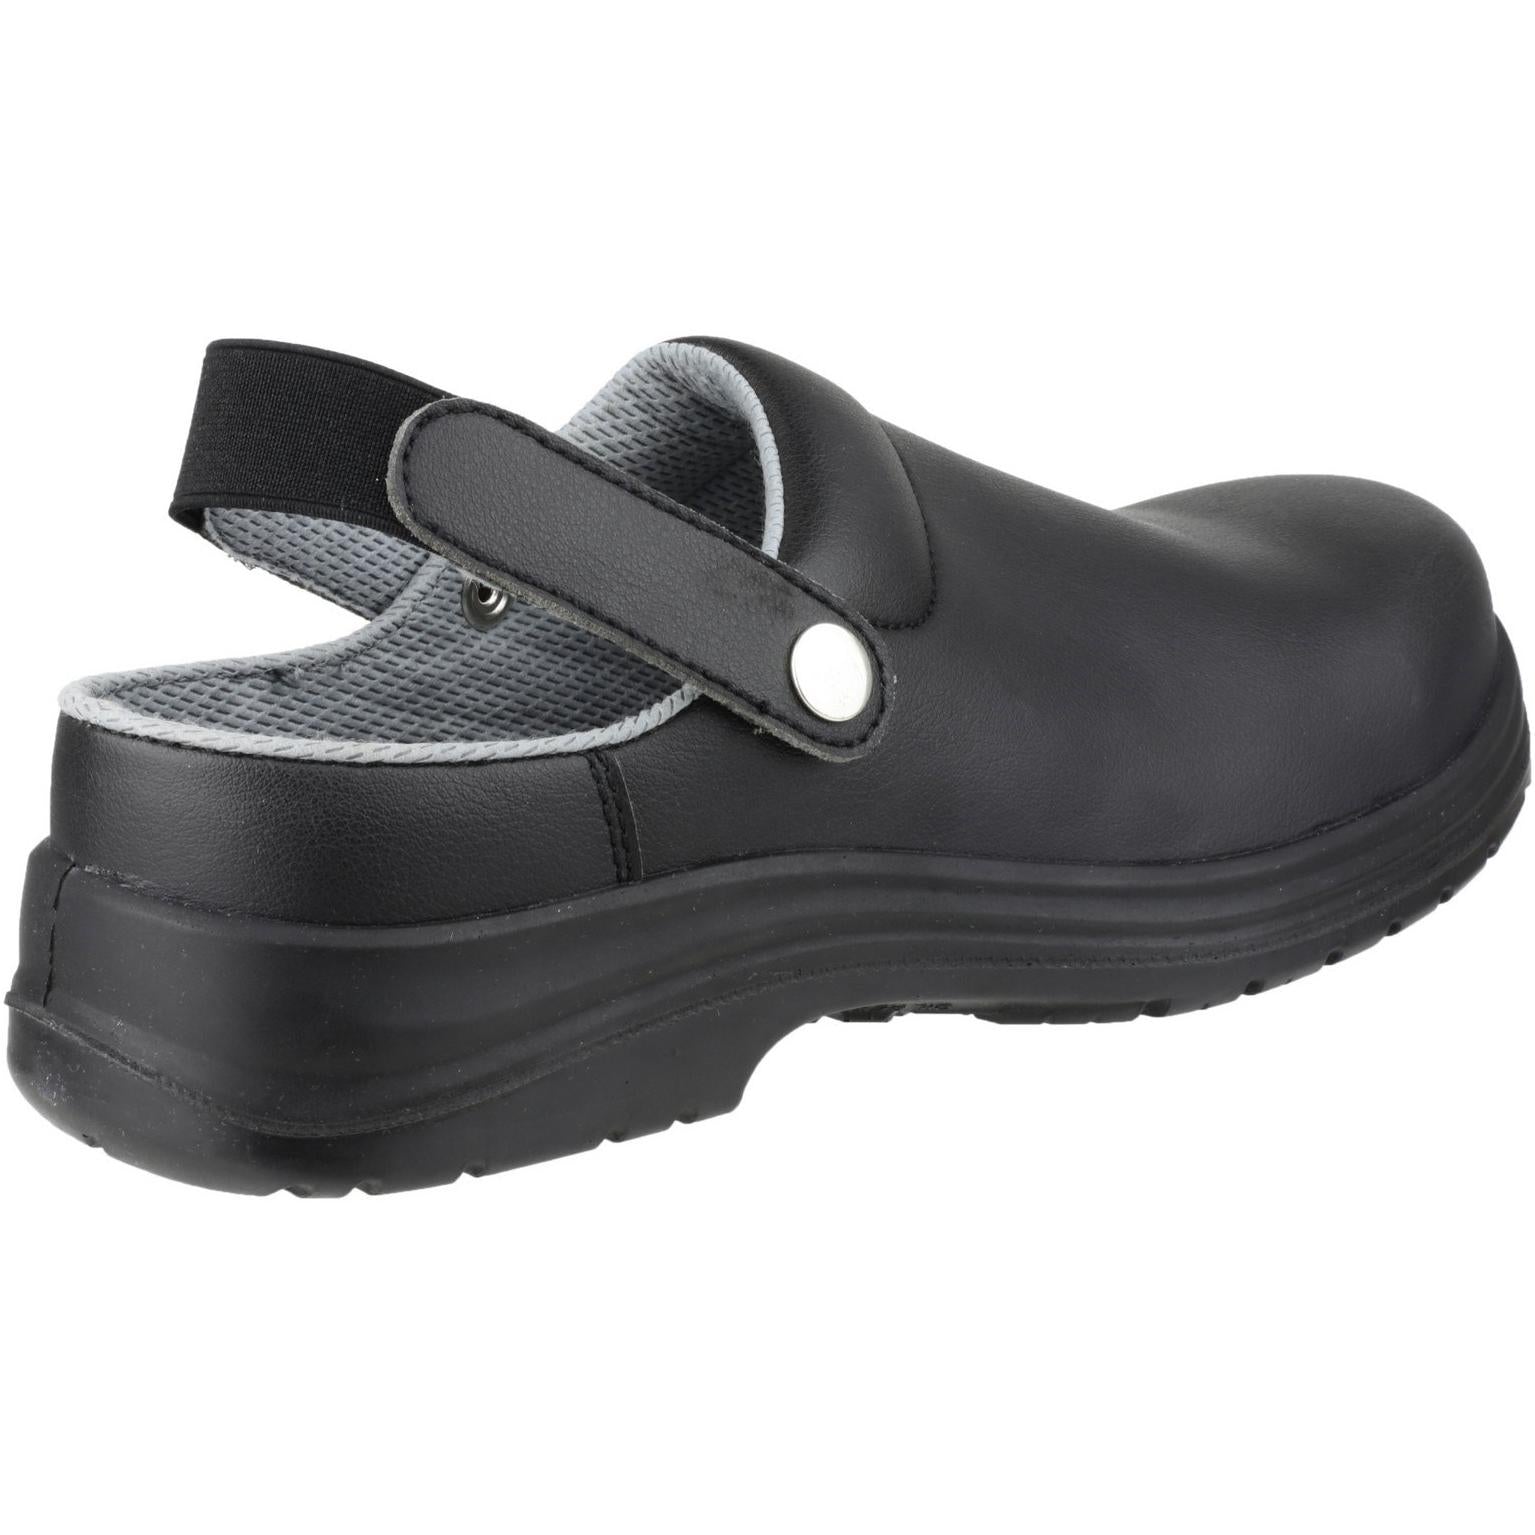 Amblers Safety FS514 Antistatic Slip on Safety Clog Boots